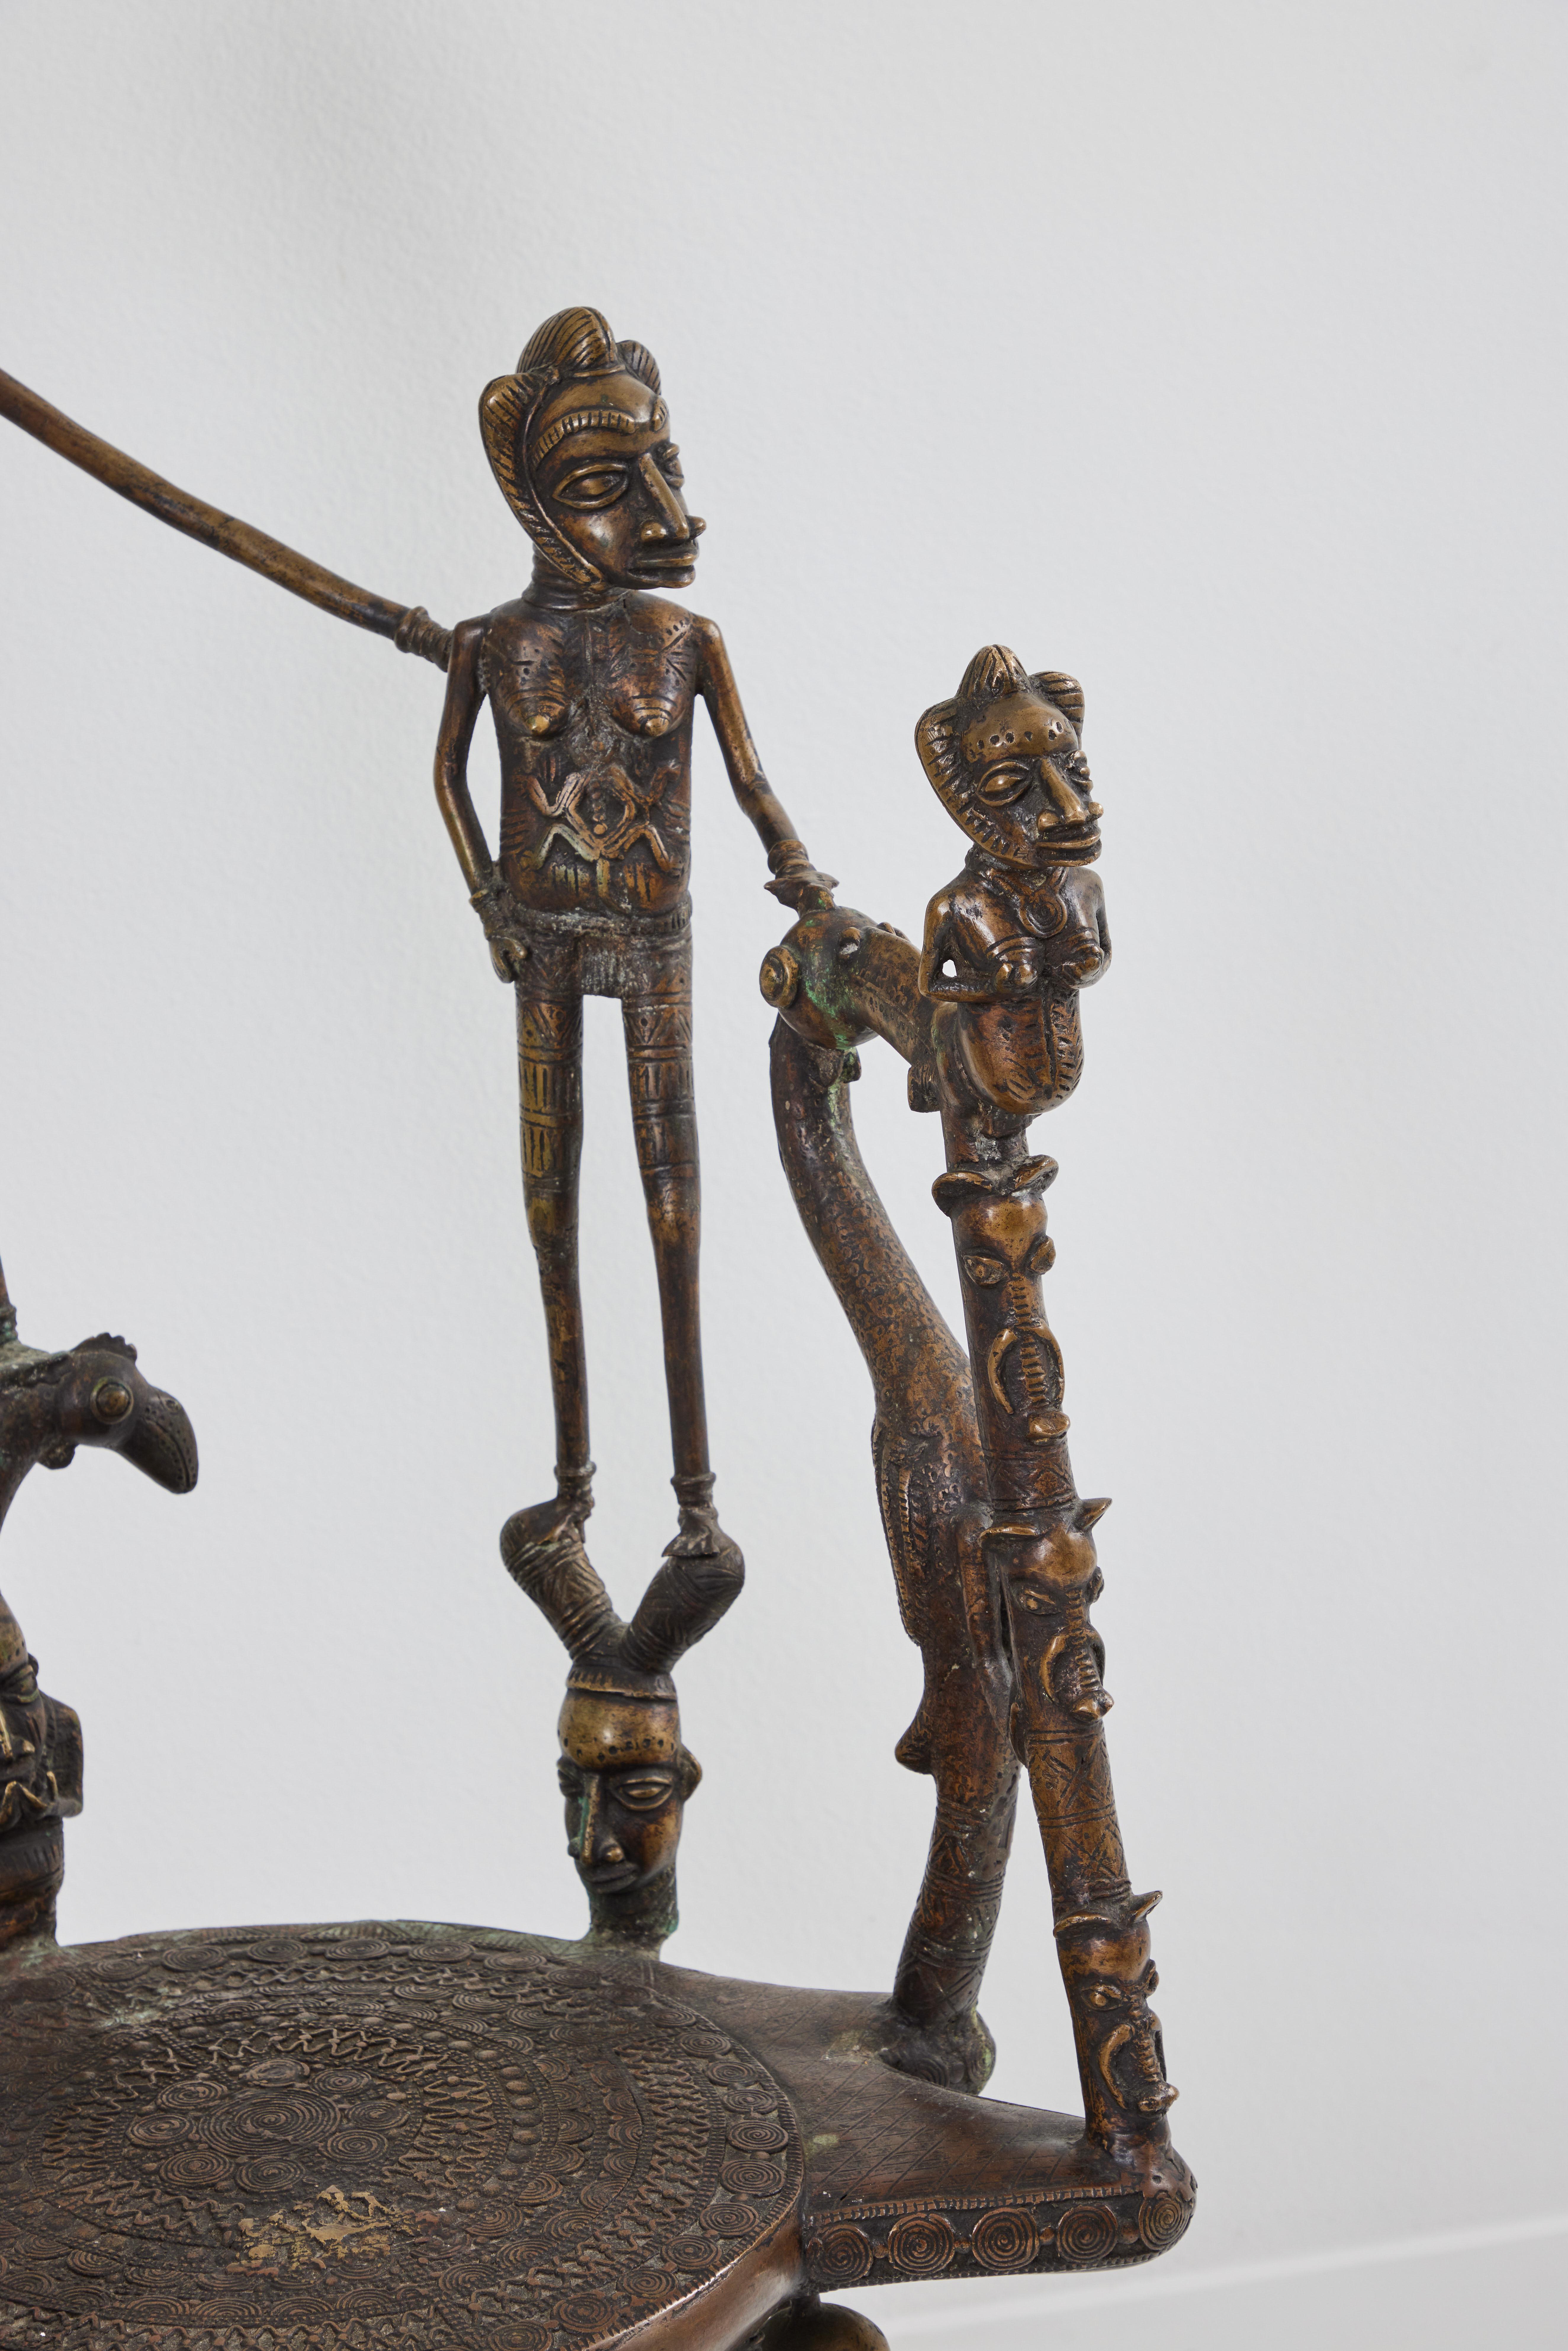 This is a solid cast bronze African throne chair from the country of Benin. Displayed are a head/ lead figure flanked by 4 female figures that support the arms while sitting. One small figure holds up the lead figure while 6 figures support the seat